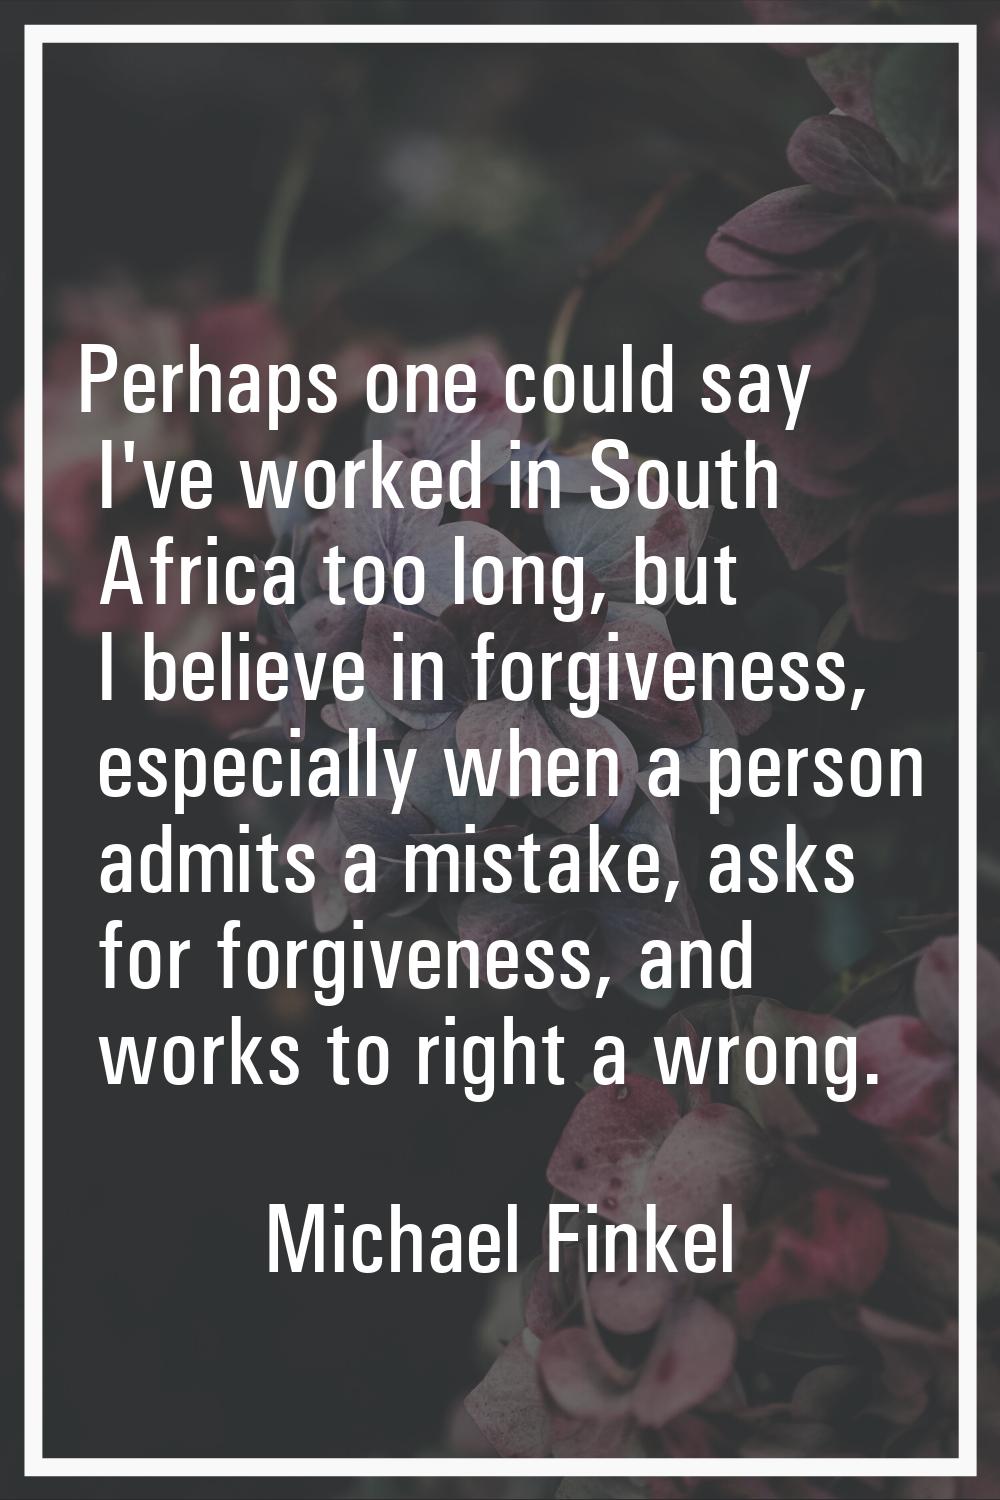 Perhaps one could say I've worked in South Africa too long, but I believe in forgiveness, especiall